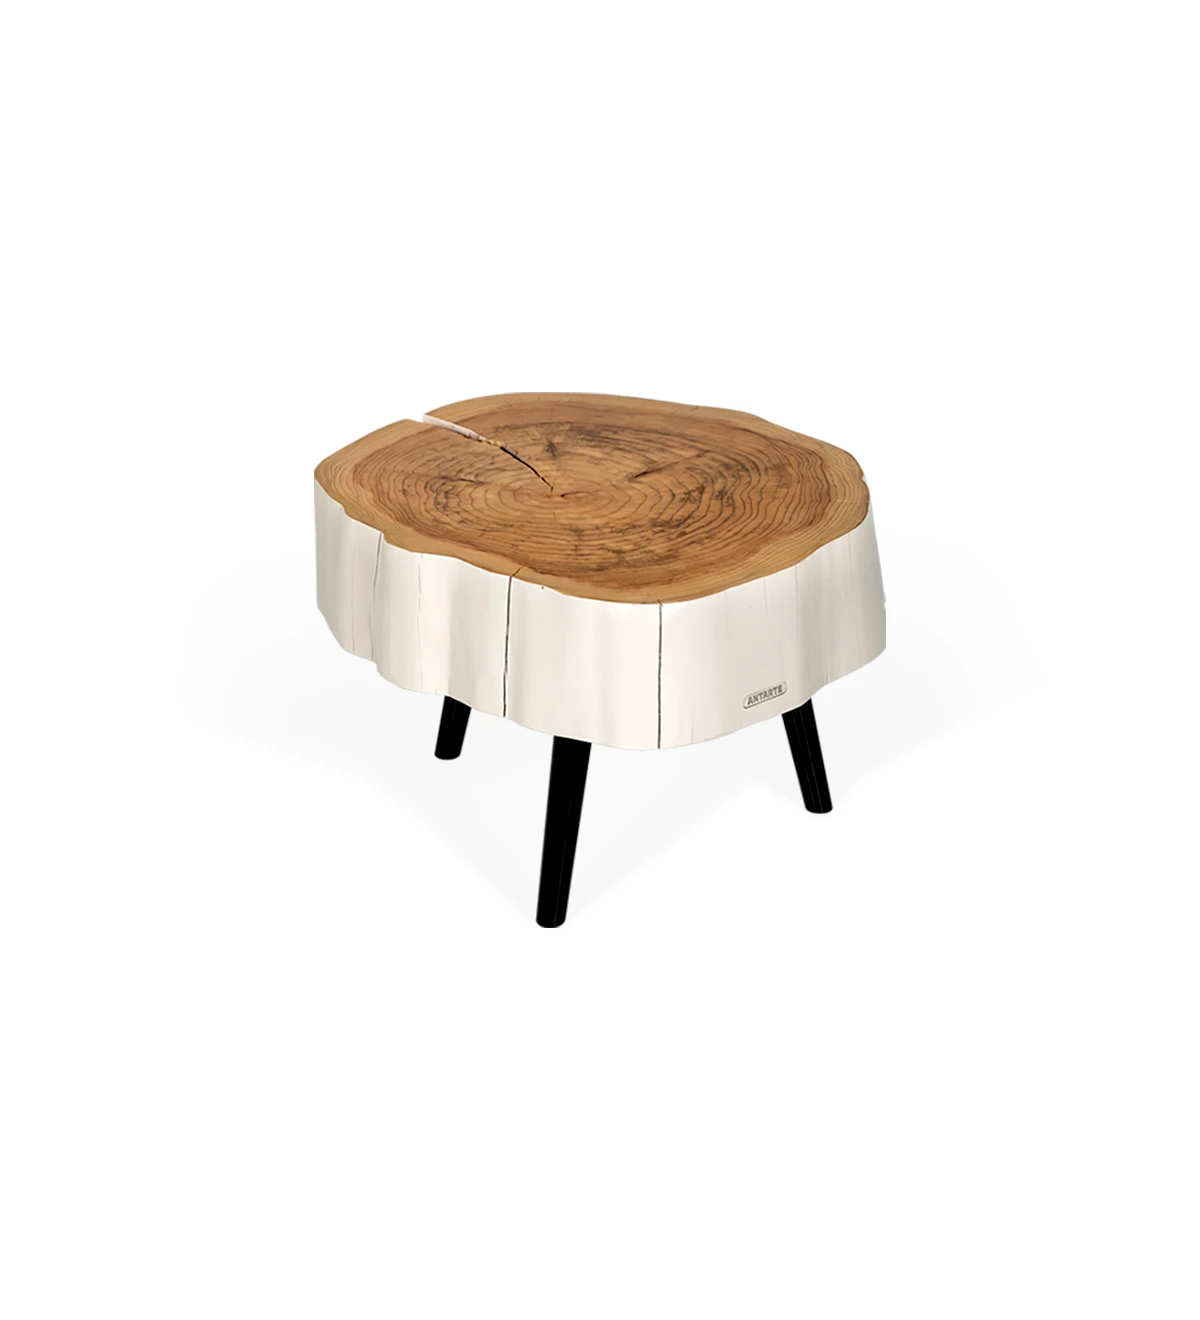 Trunk center table in natural pearl lacquered cryptomeria wood, with 3 black lacquered feet